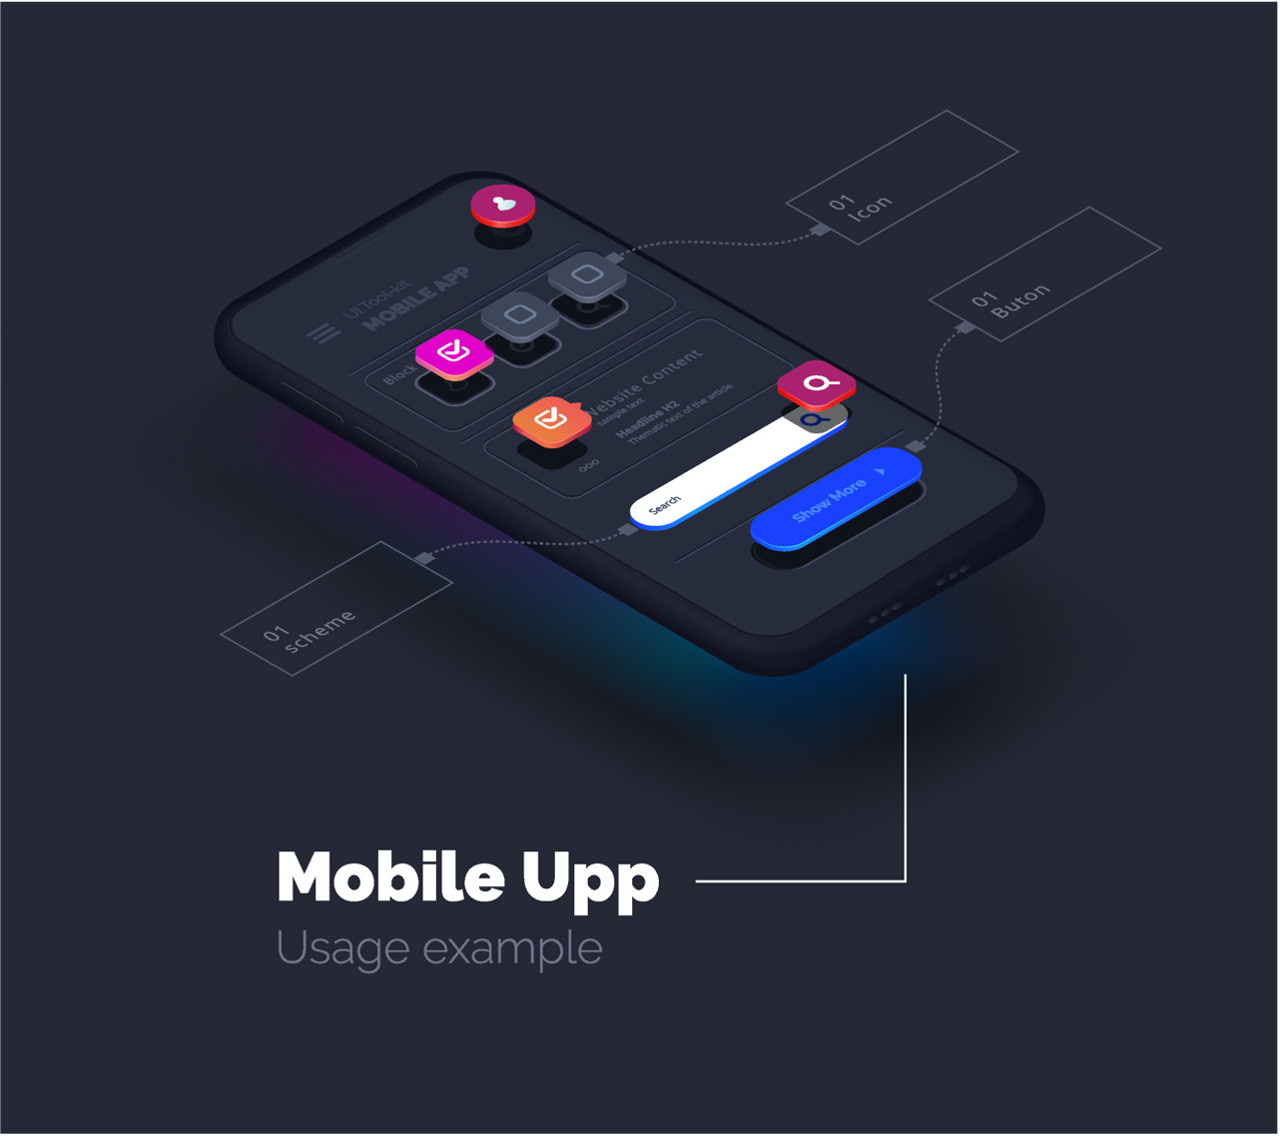 UI / UX design graphic of mobile interface